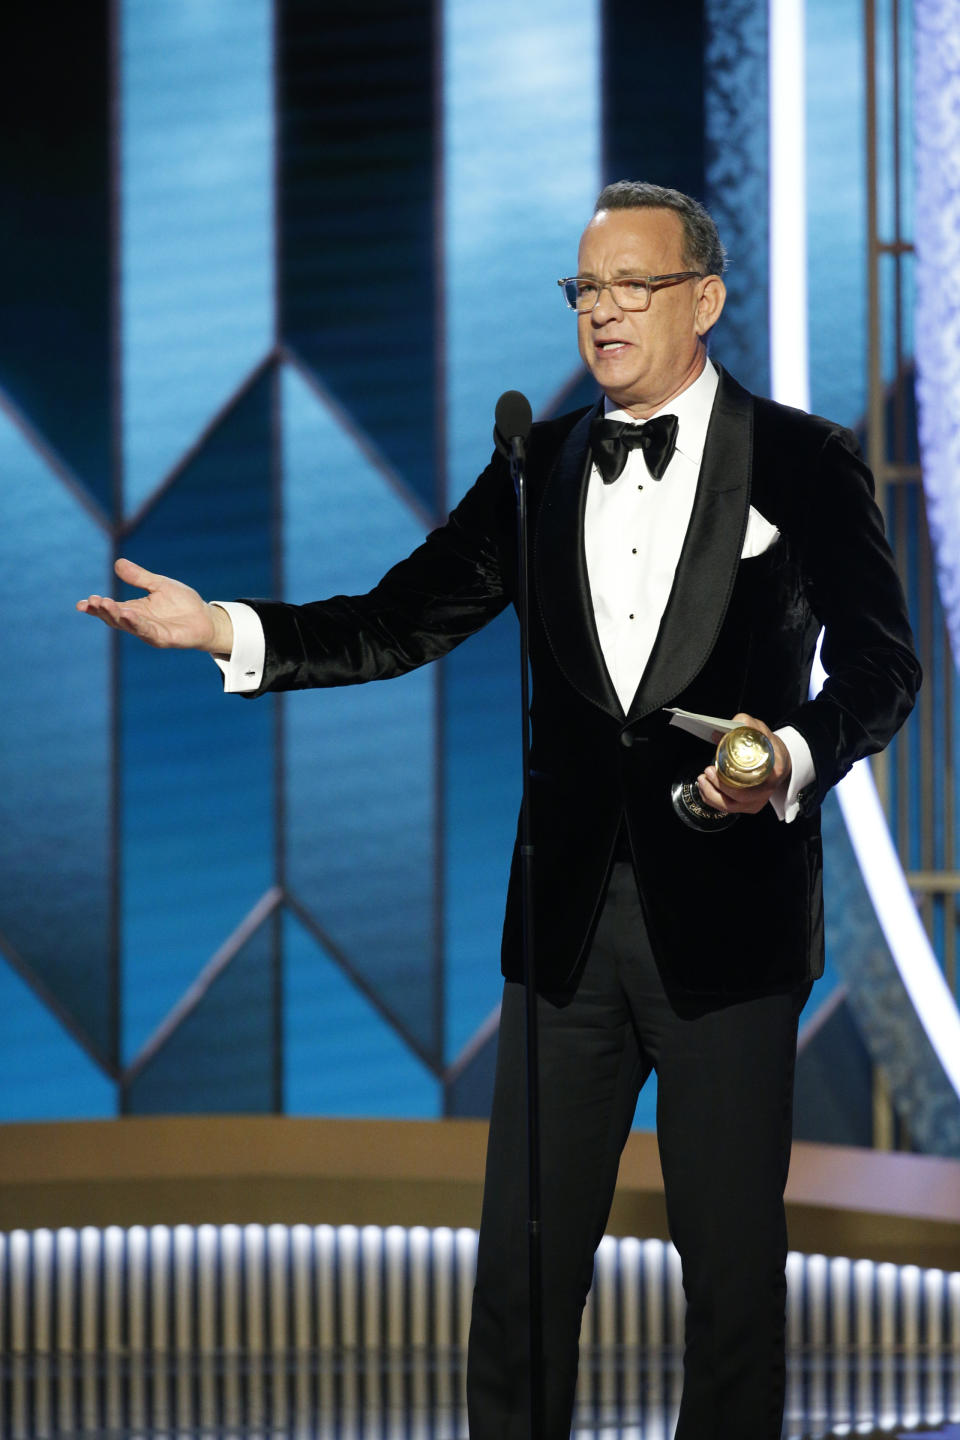 This image released by NBC shows Tom Hanks accepting the Cecil B. DeMille Award at the 77th Annual Golden Globe Awards at the Beverly Hilton Hotel in Beverly Hills, Calif., on Sunday, Jan. 5, 2020. (Paul Drinkwater/NBC via AP)